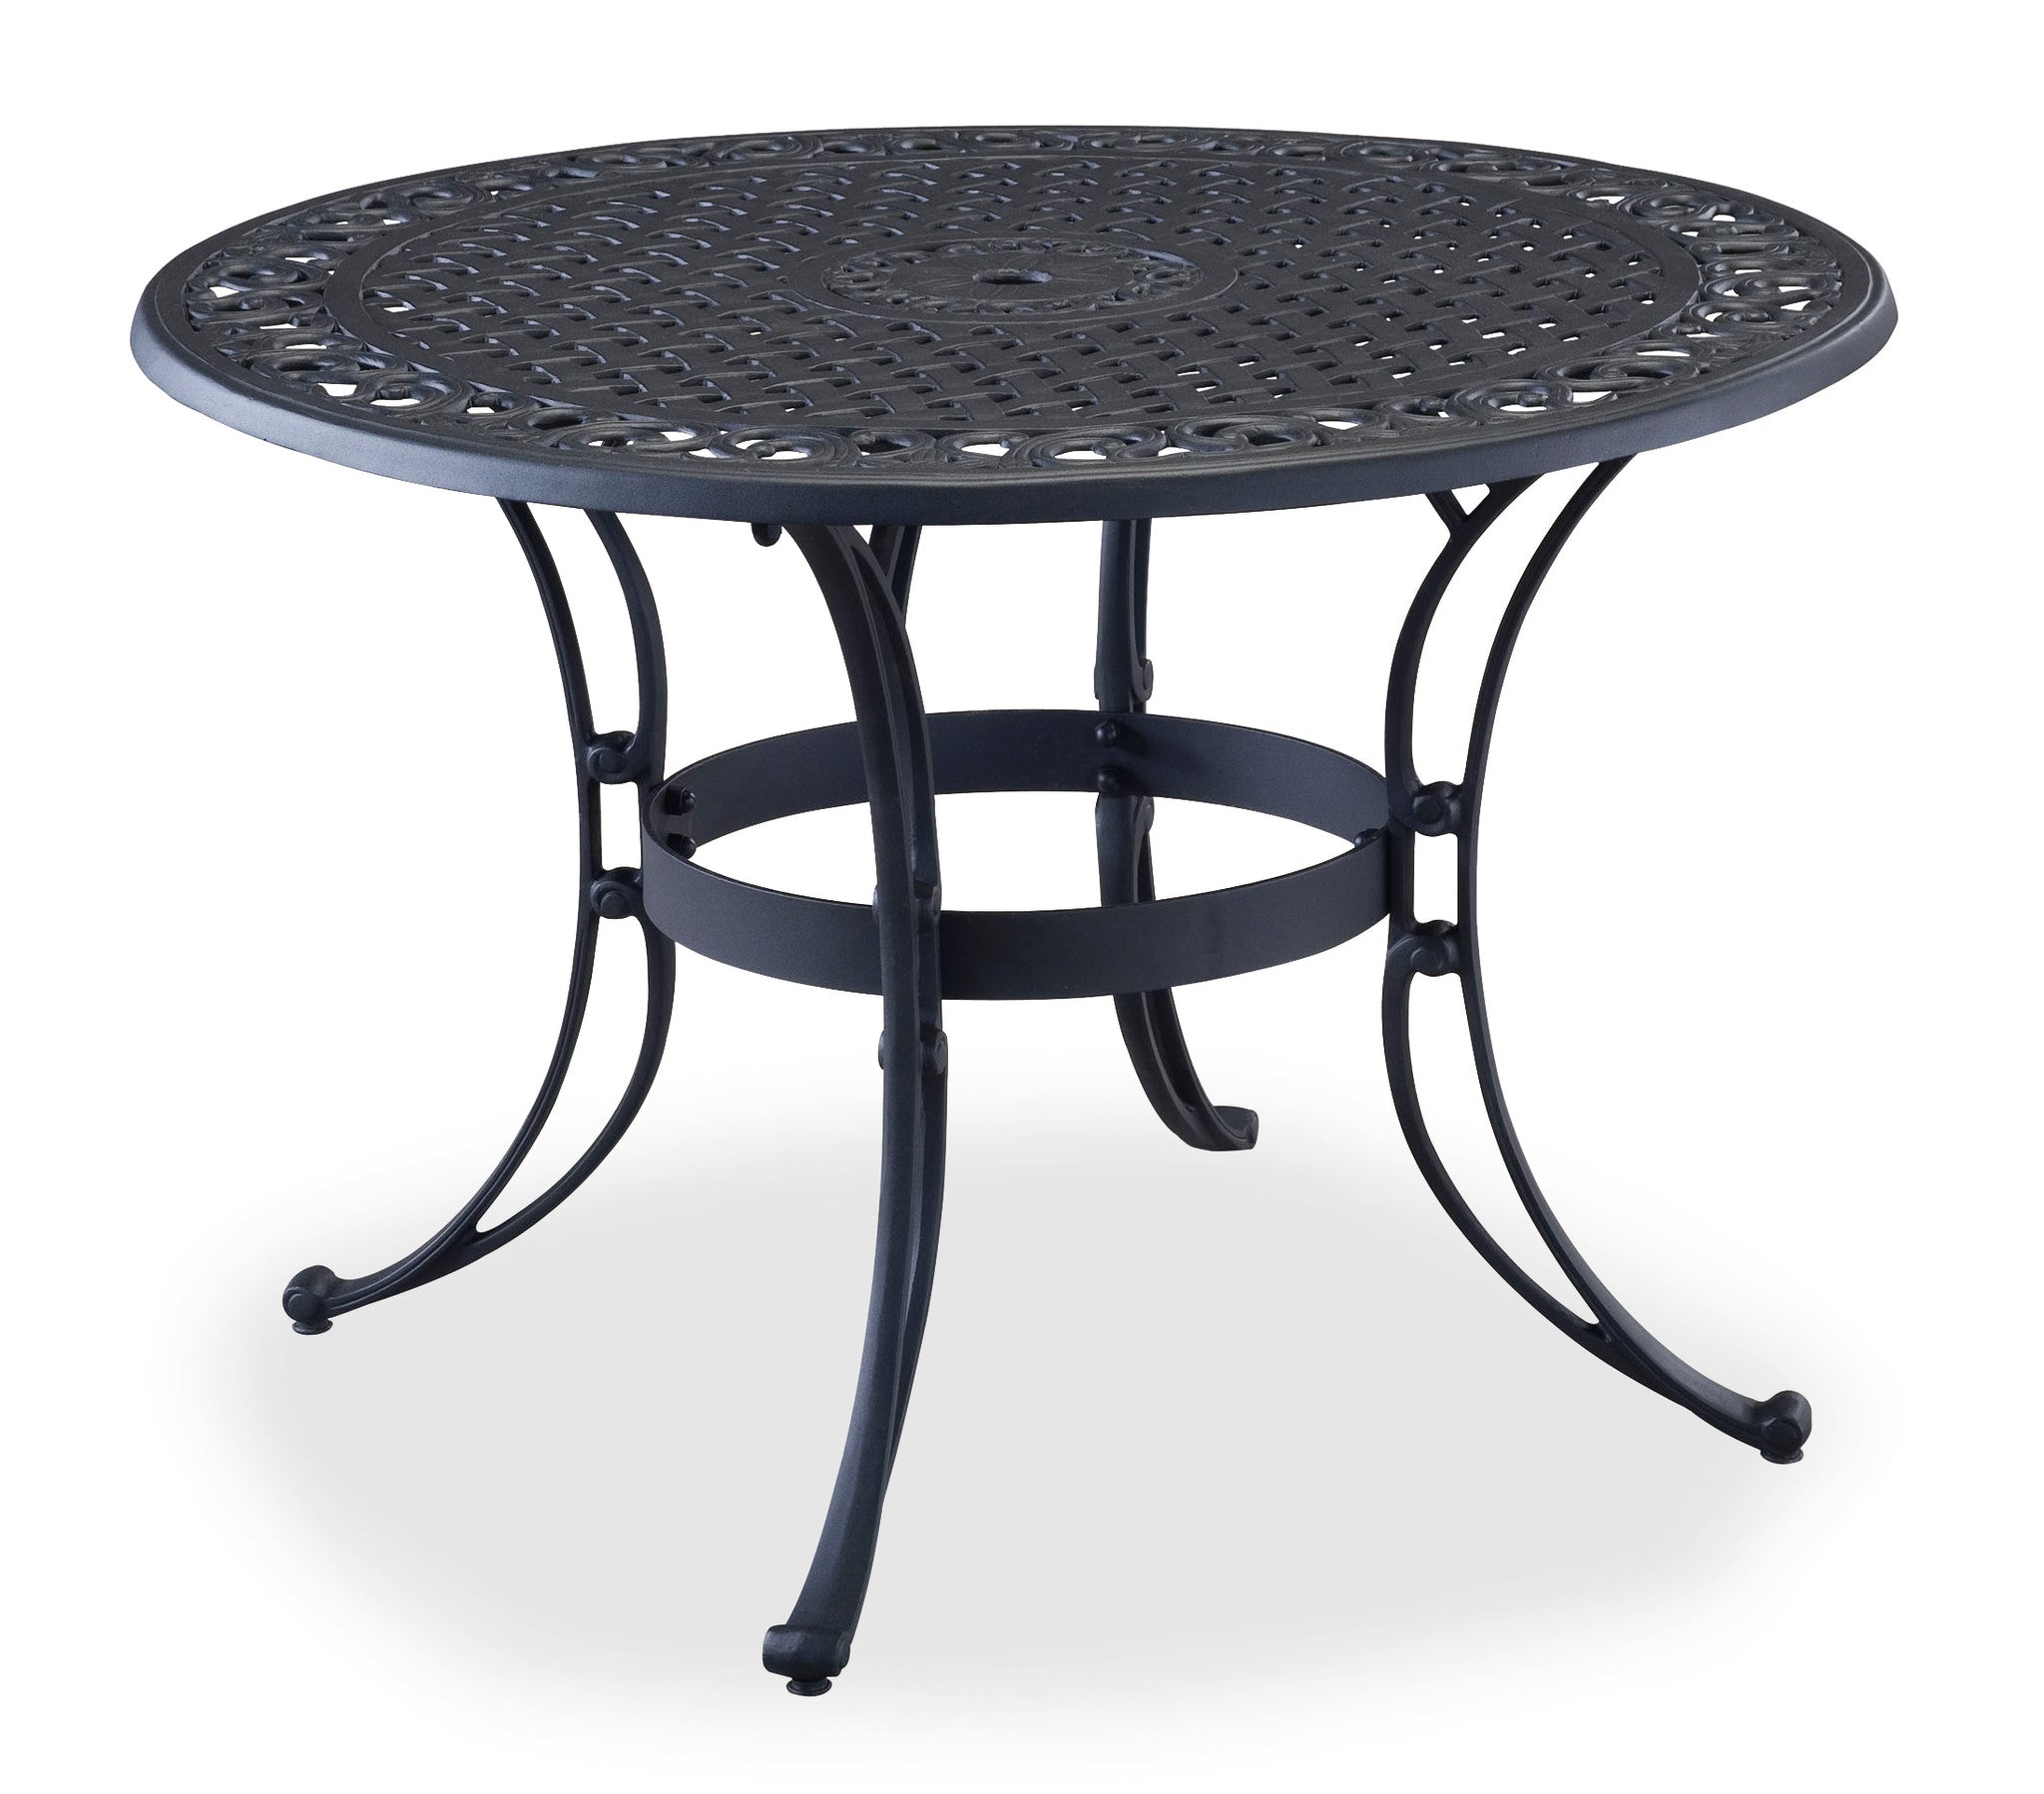 Sanibel 5 Piece Outdoor Dining Set by Homestyles - Black - Aluminum, Upholstered, Fabric - 6654-308C